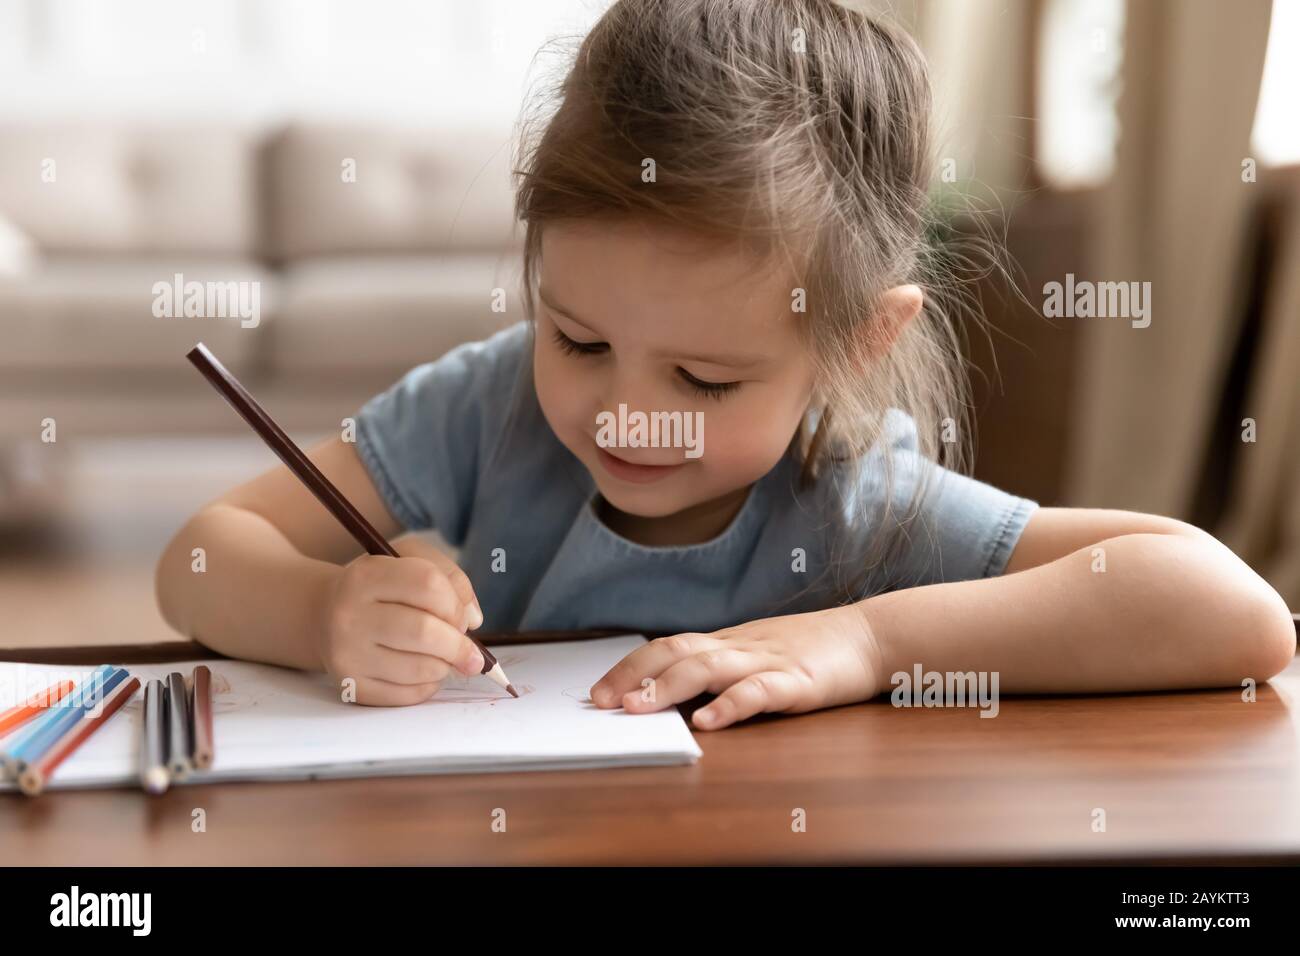 Cute little preschool child girl drawing pictures with colored pencils. Stock Photo